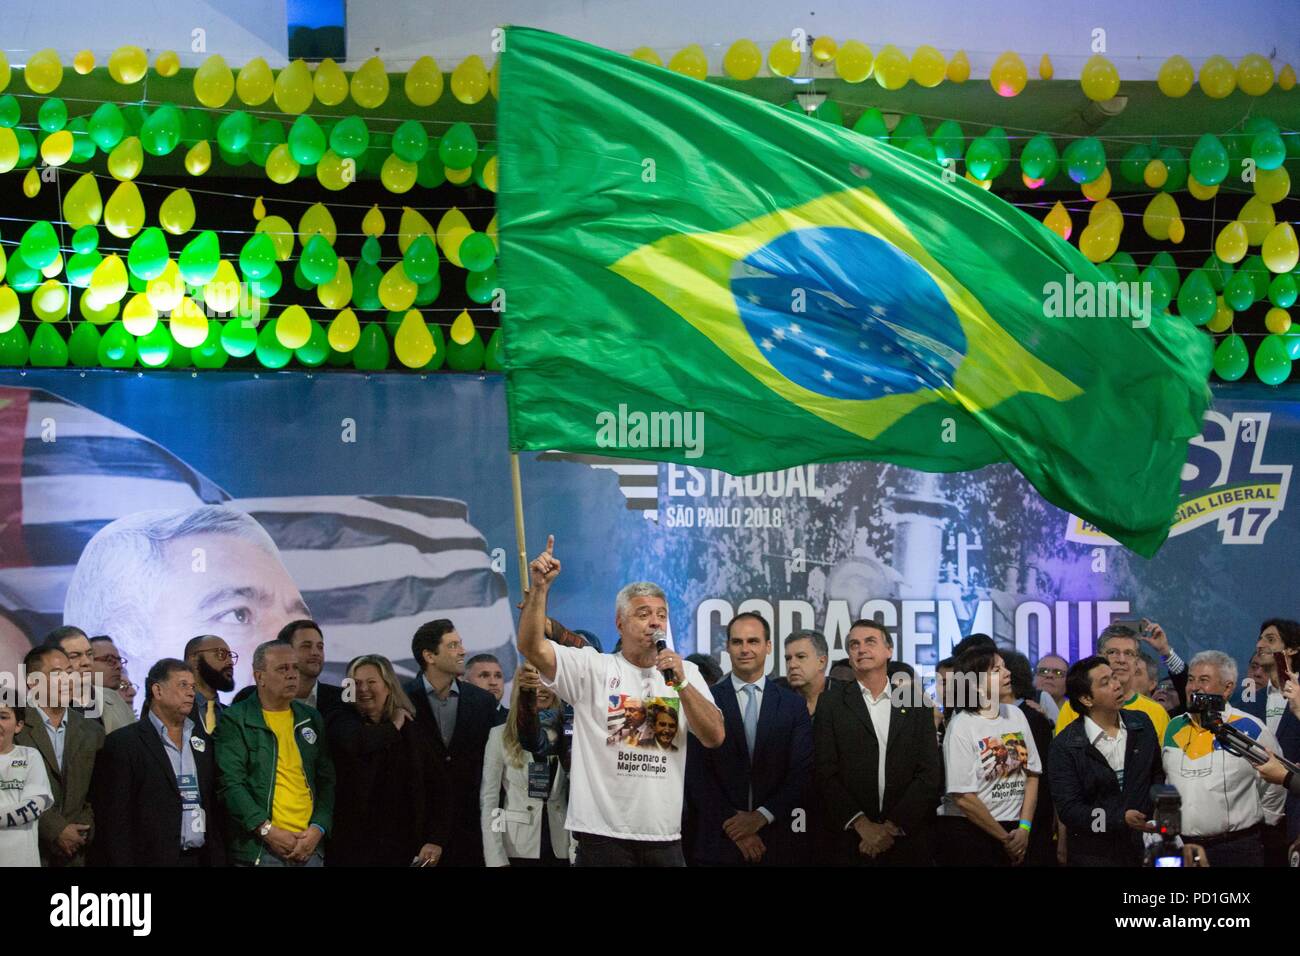 Sao Paulo, Sao Paulo, Brazil. 5th Aug, 2018. PSL (Social Liberal Party) convention in SÃ£o Paulo, Brazil. The party candidates for president, deputy and senator attended the event. Credit: Paulo Lopes/ZUMA Wire/Alamy Live News Stock Photo